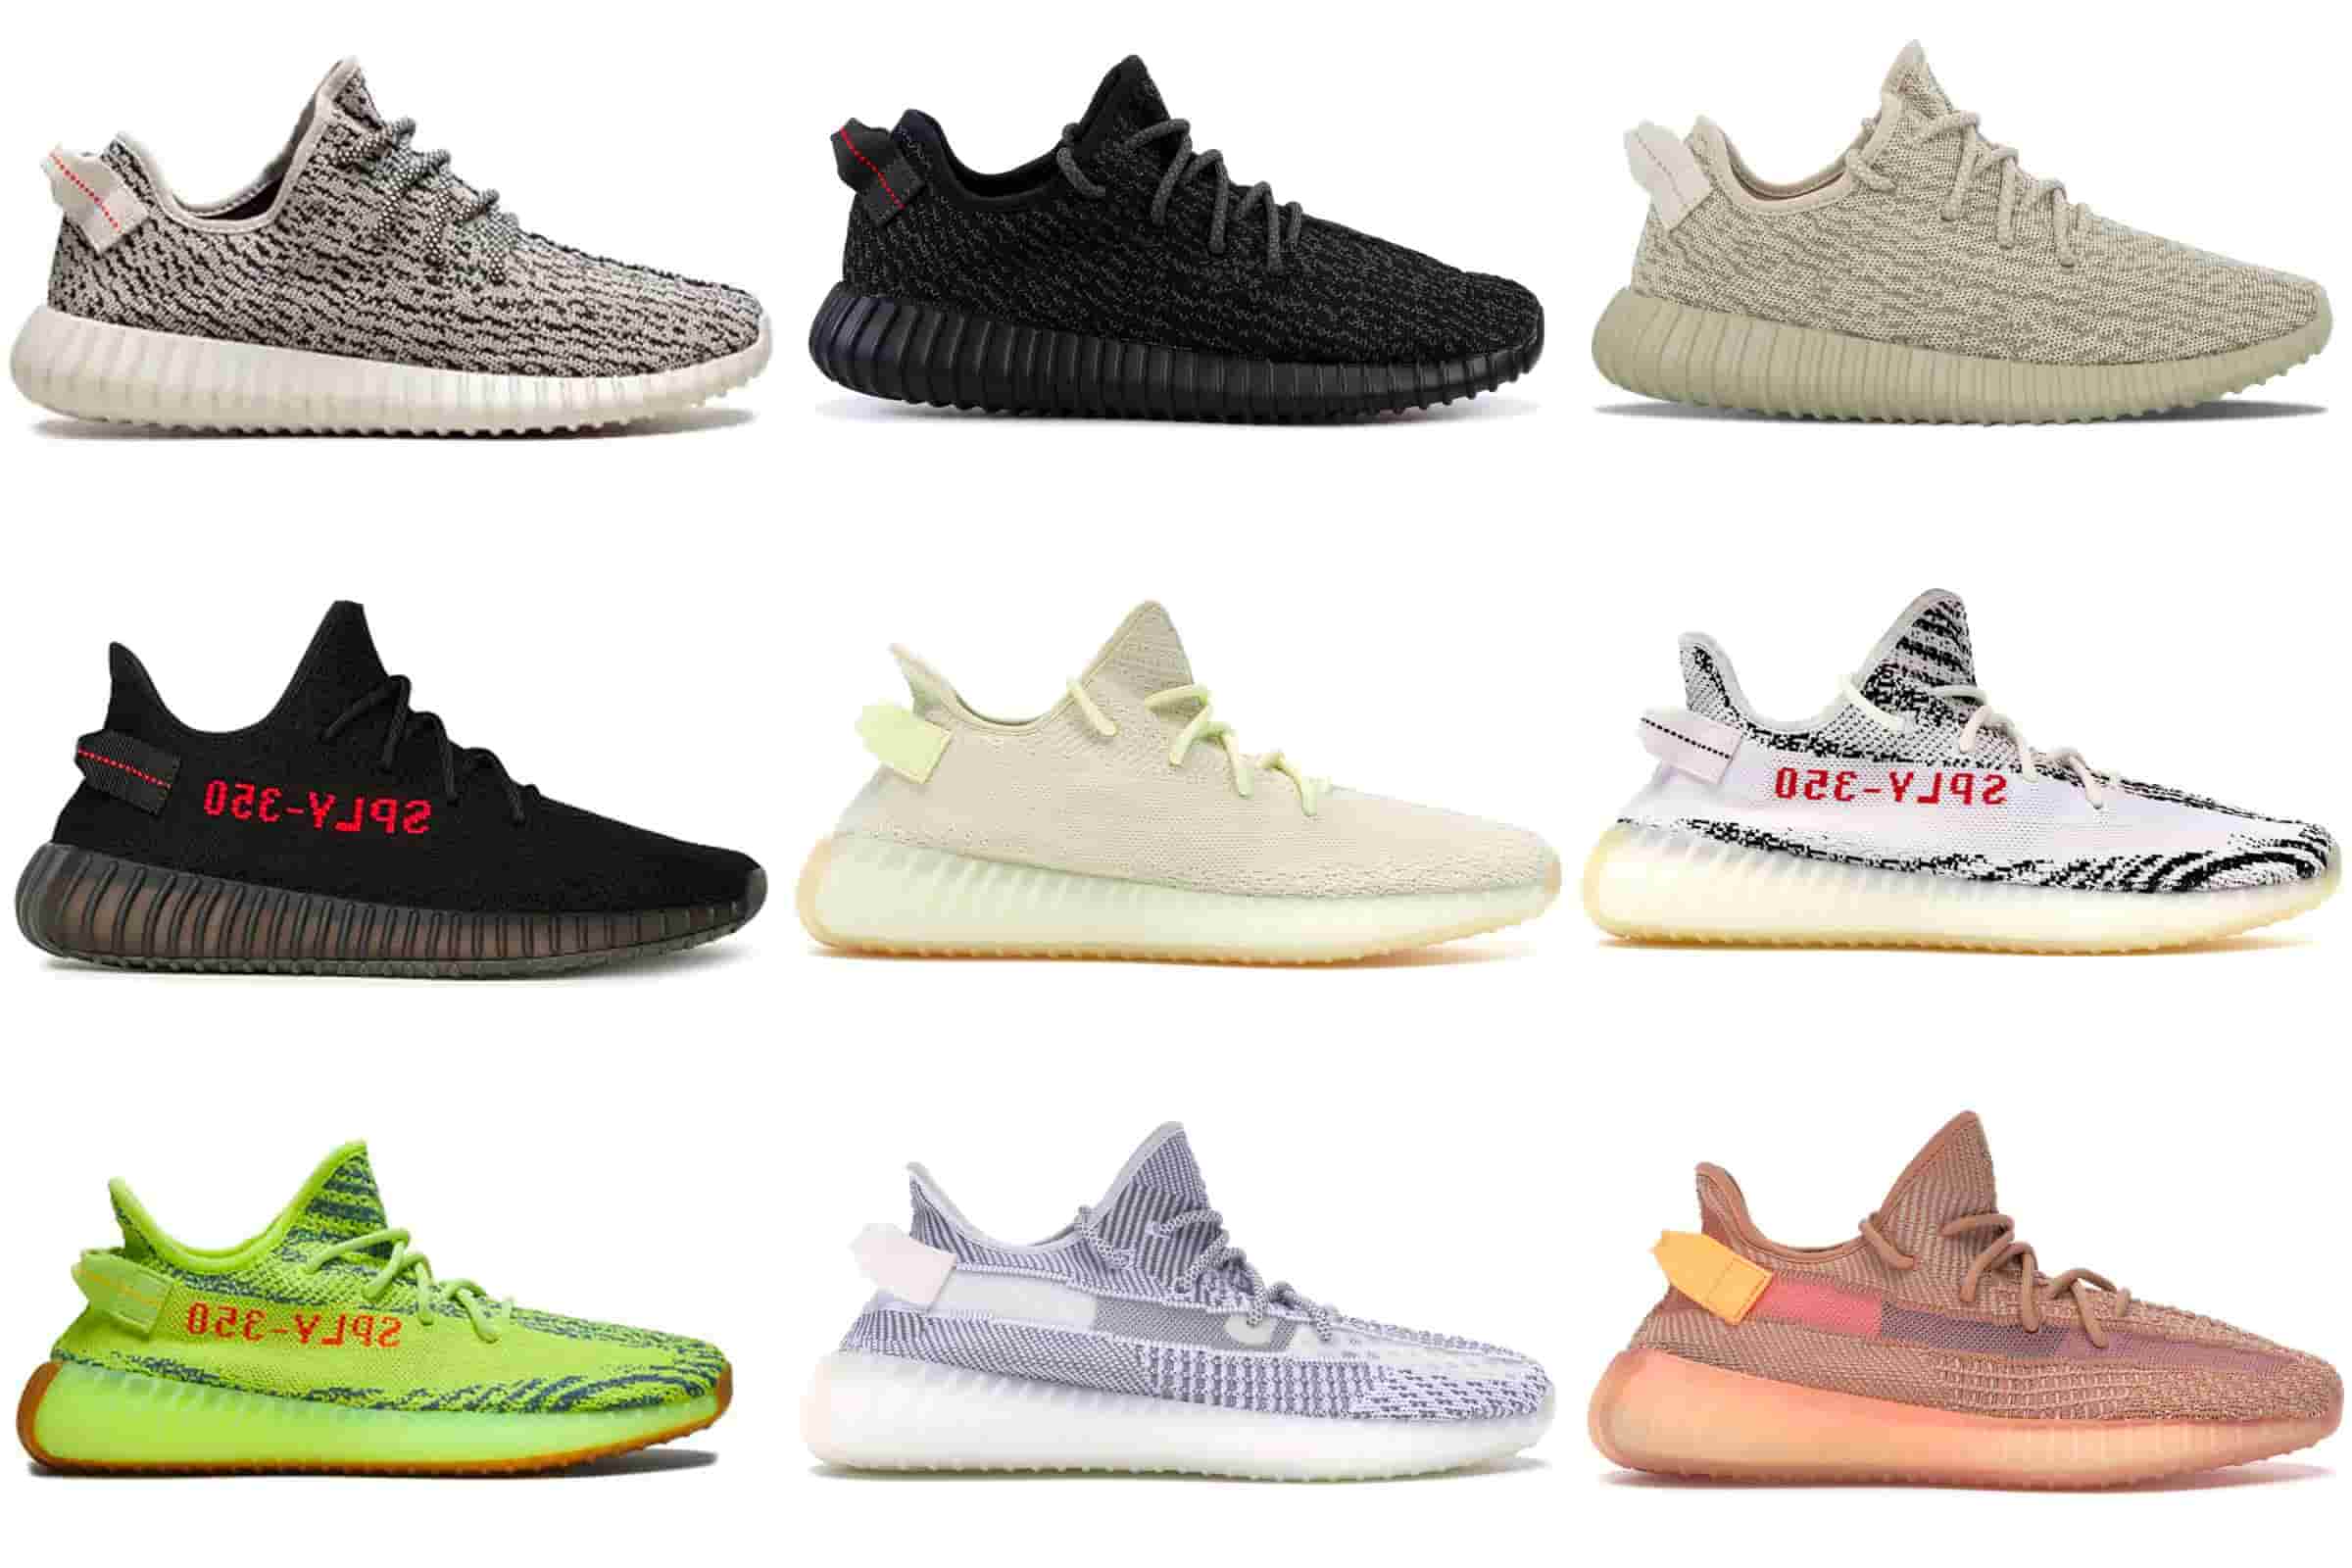 Yeezy Boost 350 V3: Is It Even Worth 